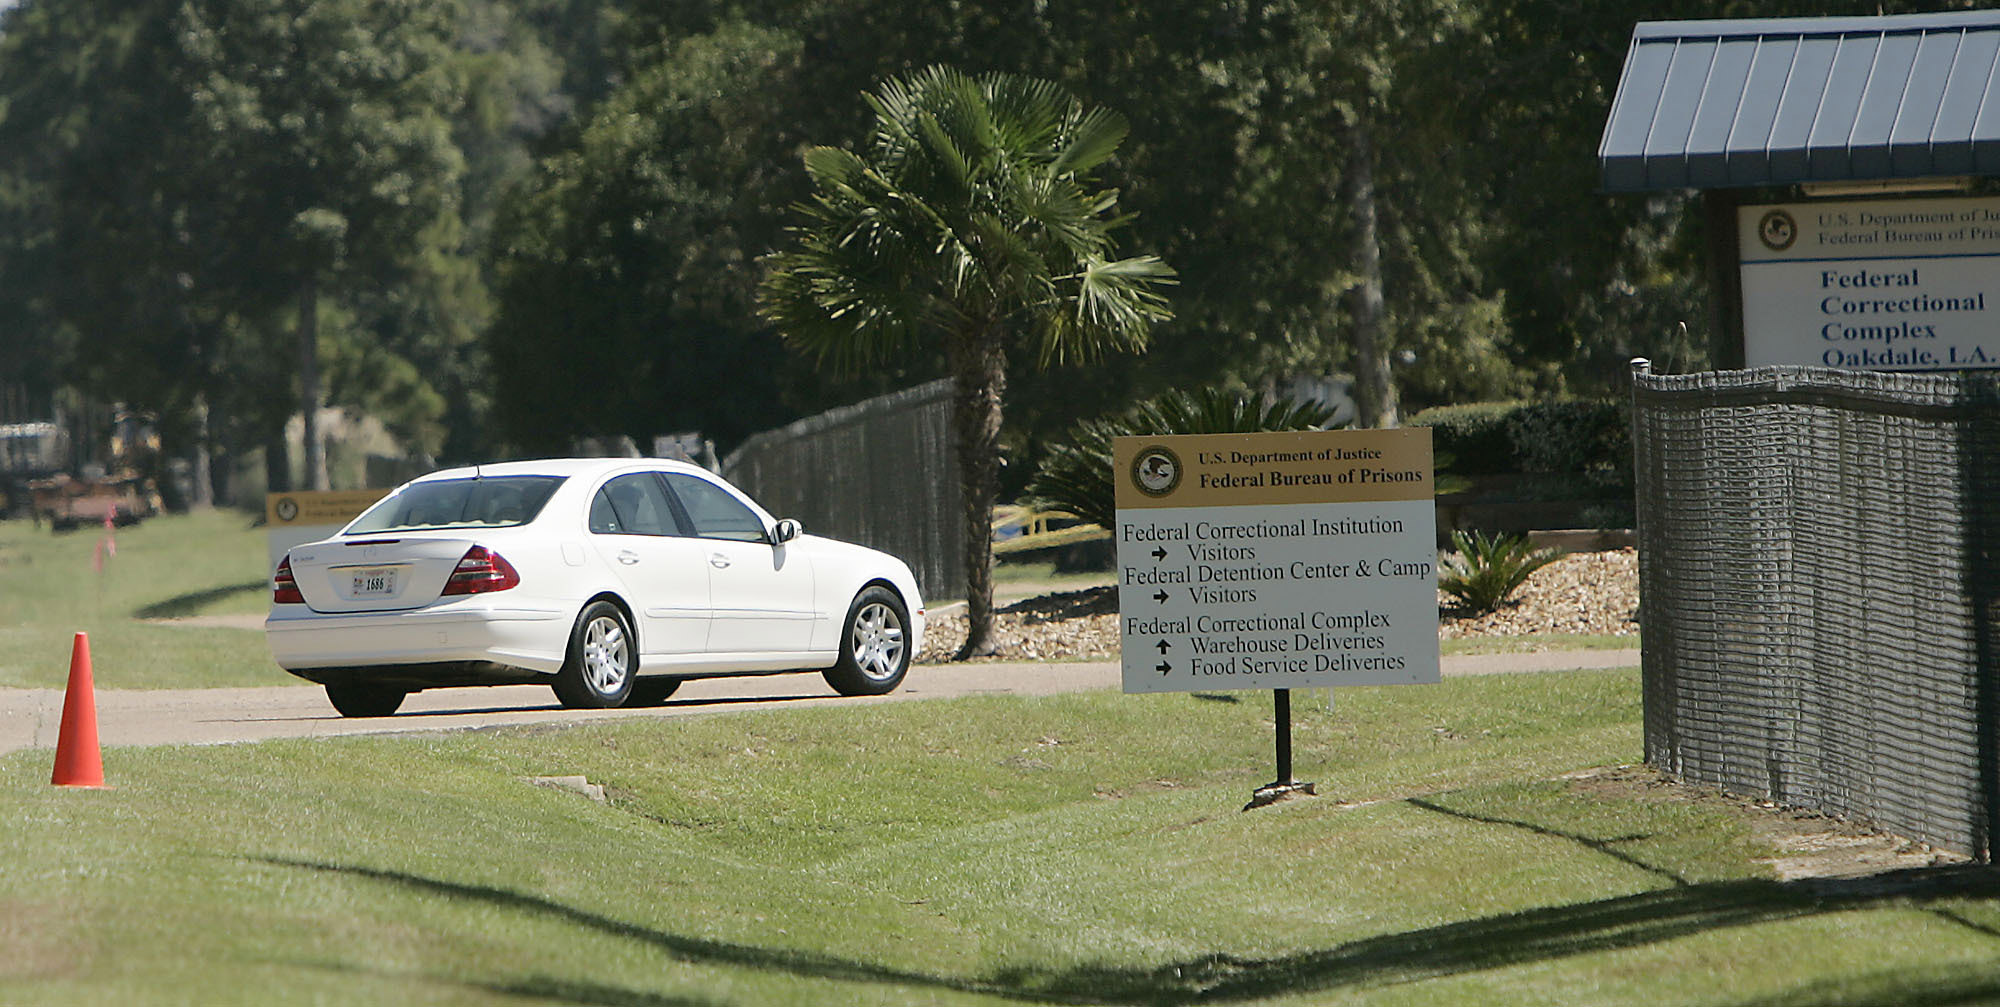 PHOTO: In this Sept. 26, 2006 file photo, a person drives through the gates of the Federal Correction Complex in Oakdale, La.